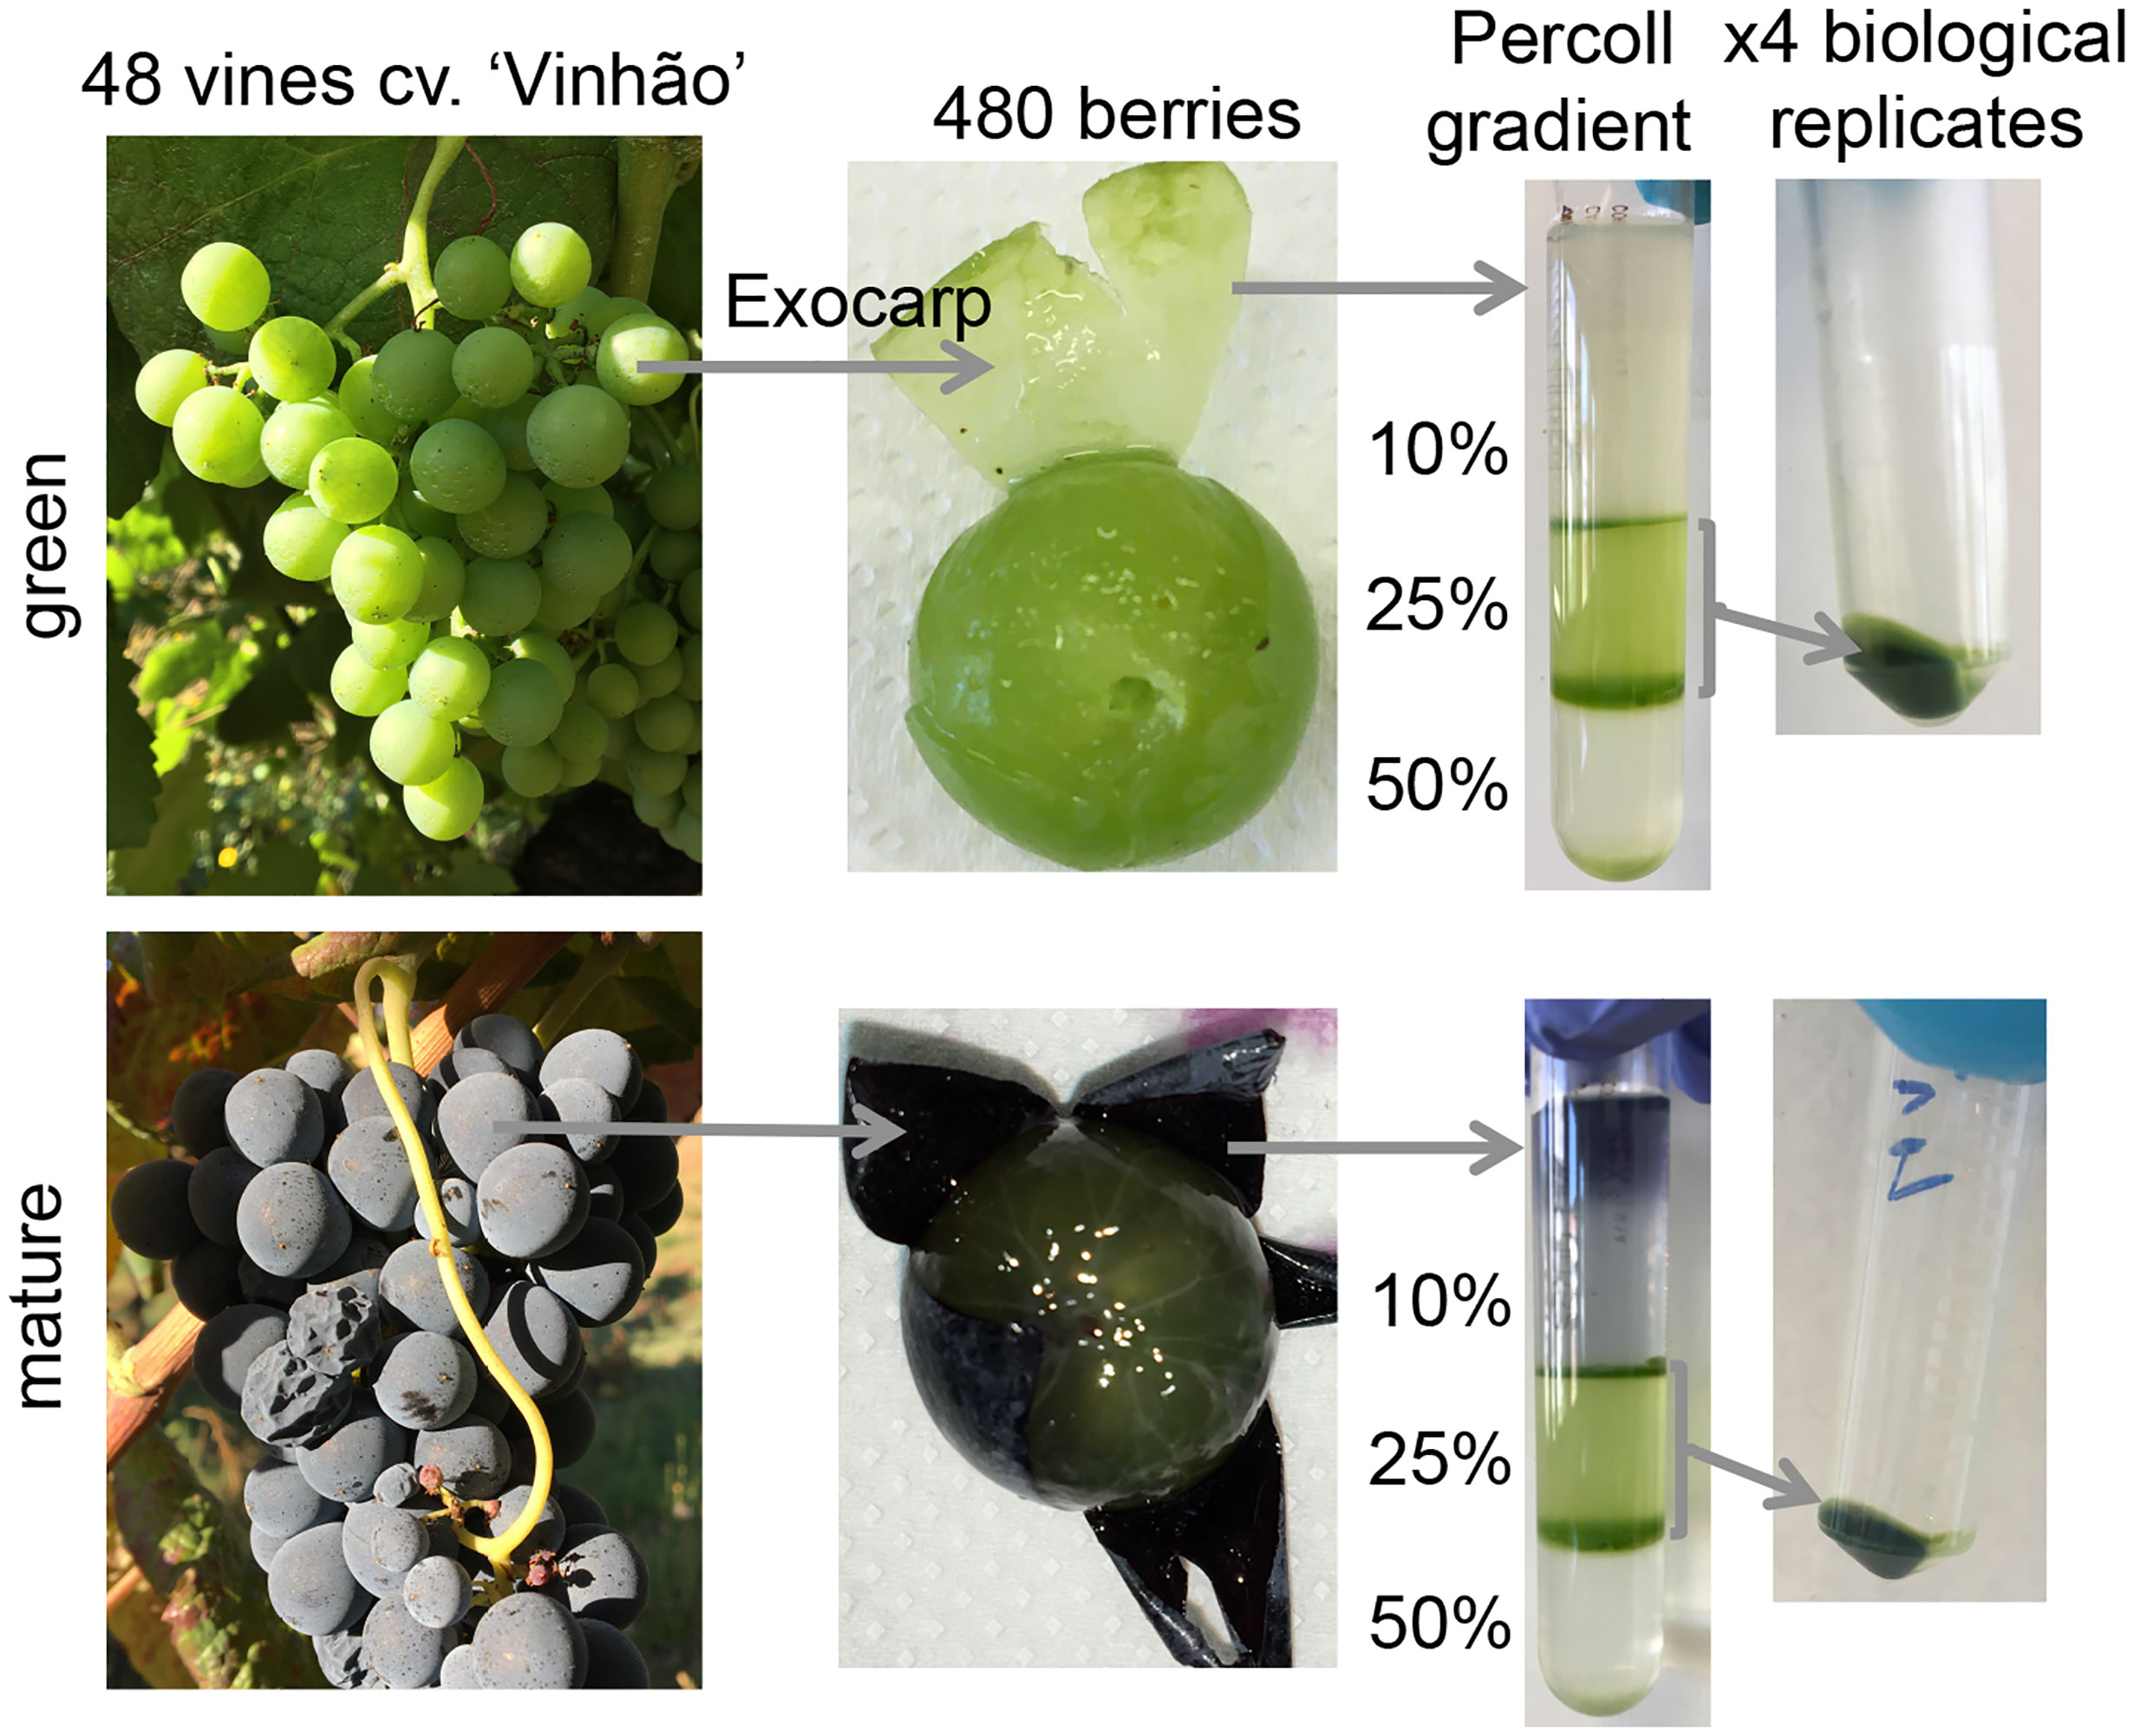 Frontiers | A proteomic analysis shows the stimulation of light reactions and inhibition of the Calvin cycle in the skin chloroplasts of ripe red grape